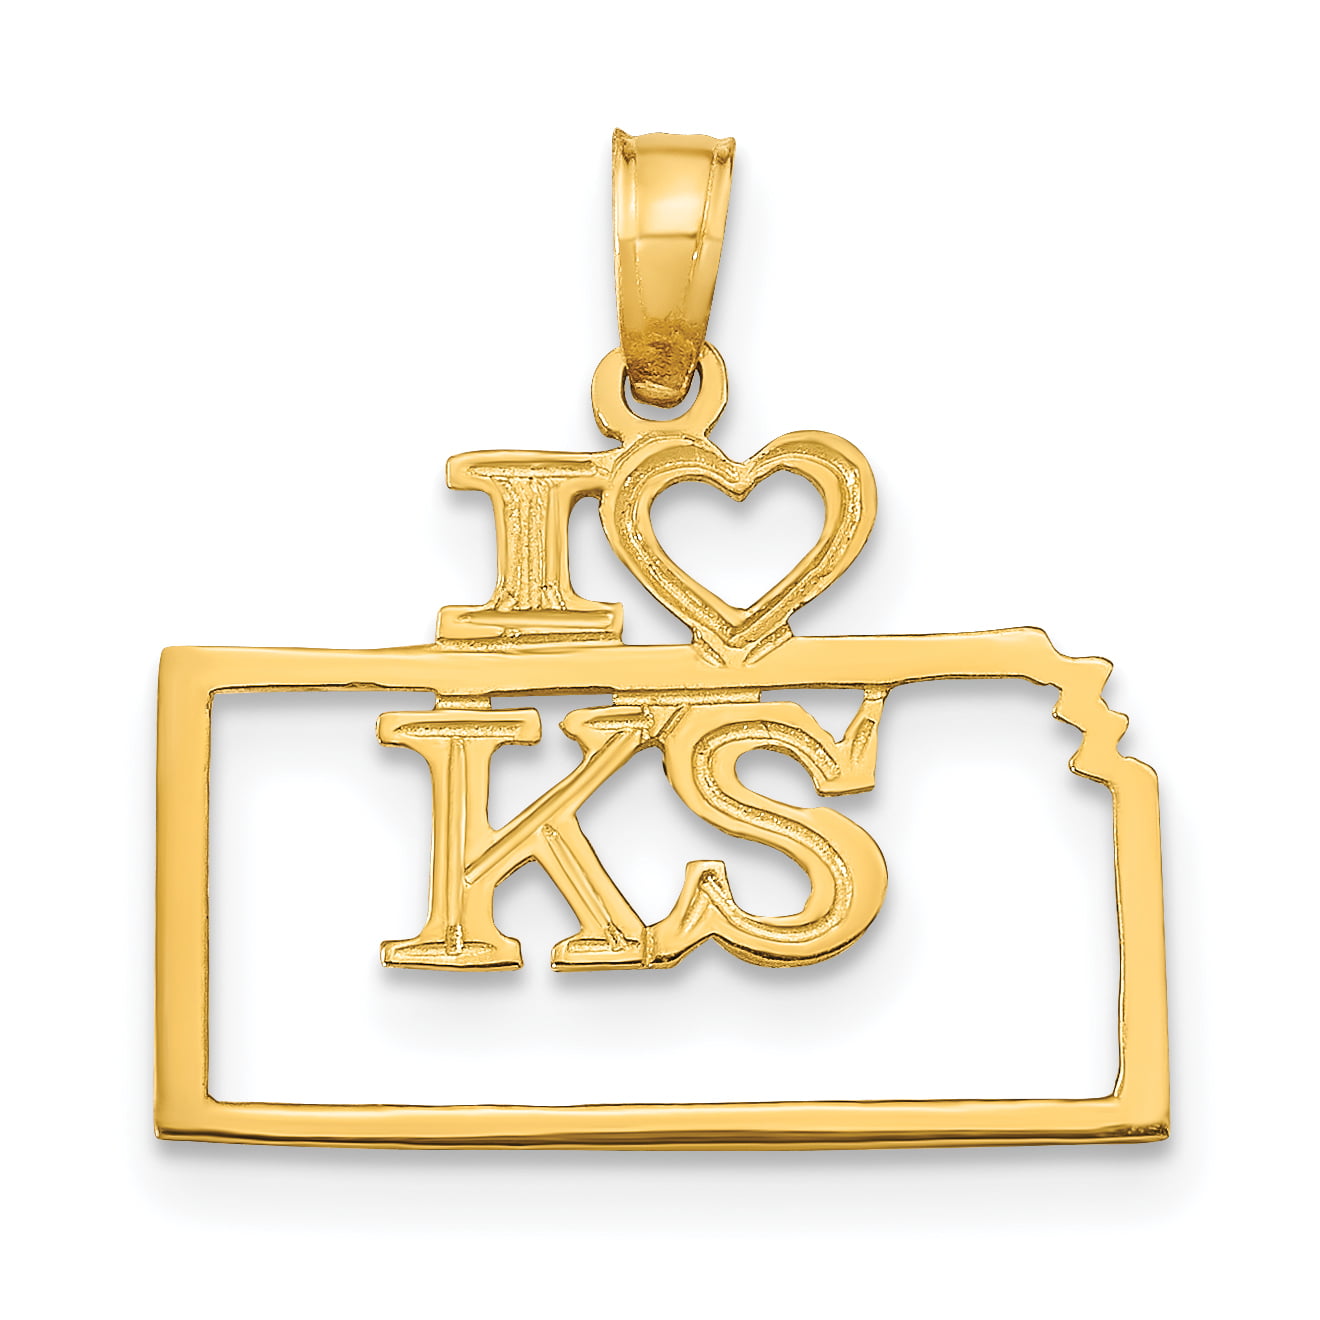 Carat in Karats 14K Yellow Gold Solid Louisiana State Pendant Charm (25mm x 18mm) with 14K Yellow Gold Lightweight Rope Chain Necklace 16'', Adult